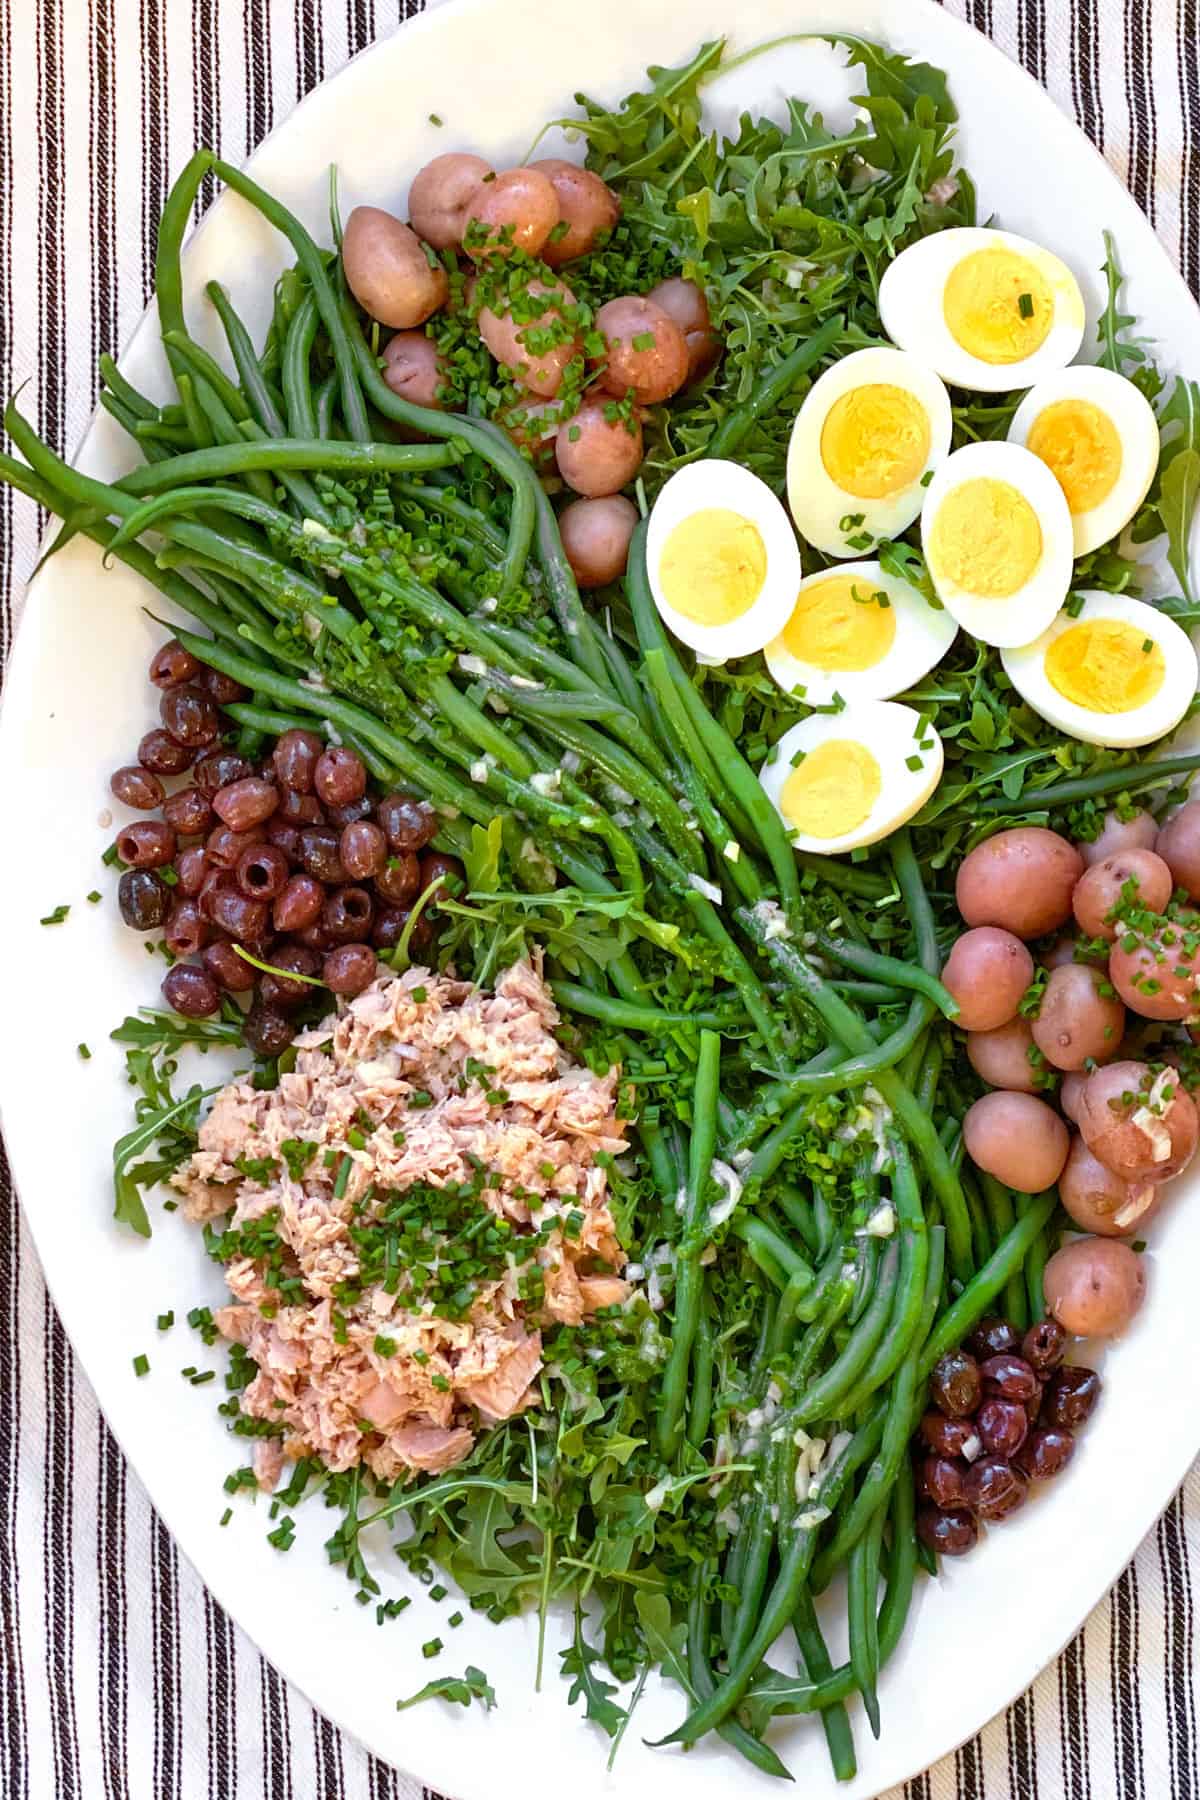 white platter topped with salad nicoise: tuna, small red potatoes, sliced hard boiled eggs, nicoise olives and French green beans